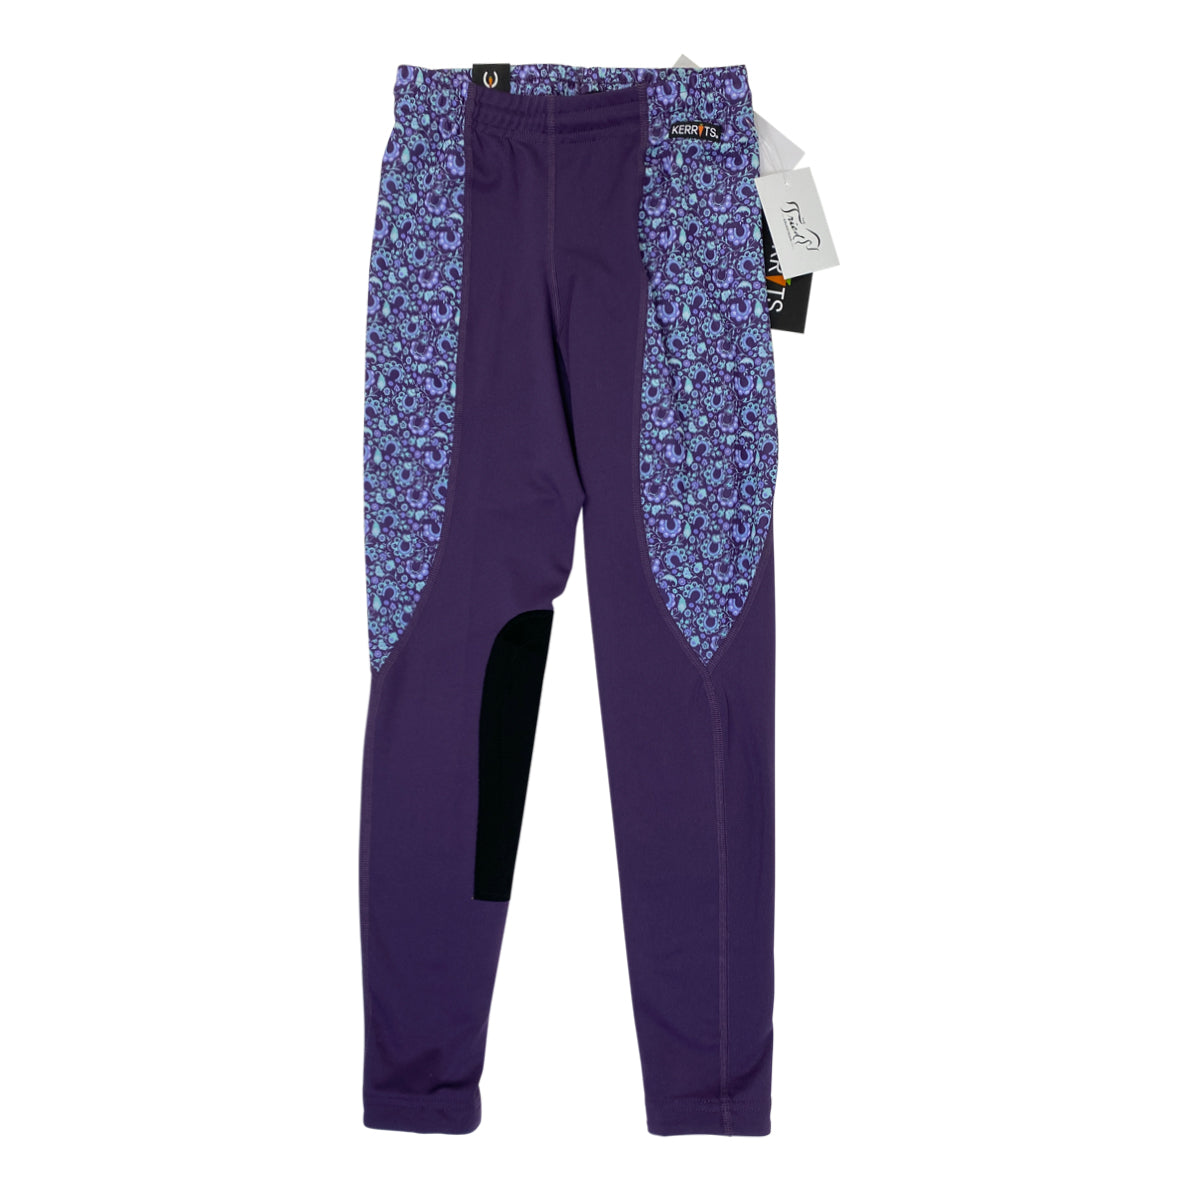 Kerrits Knee Patch Performance Tights in Huckleberry/Iris Make Your Luck